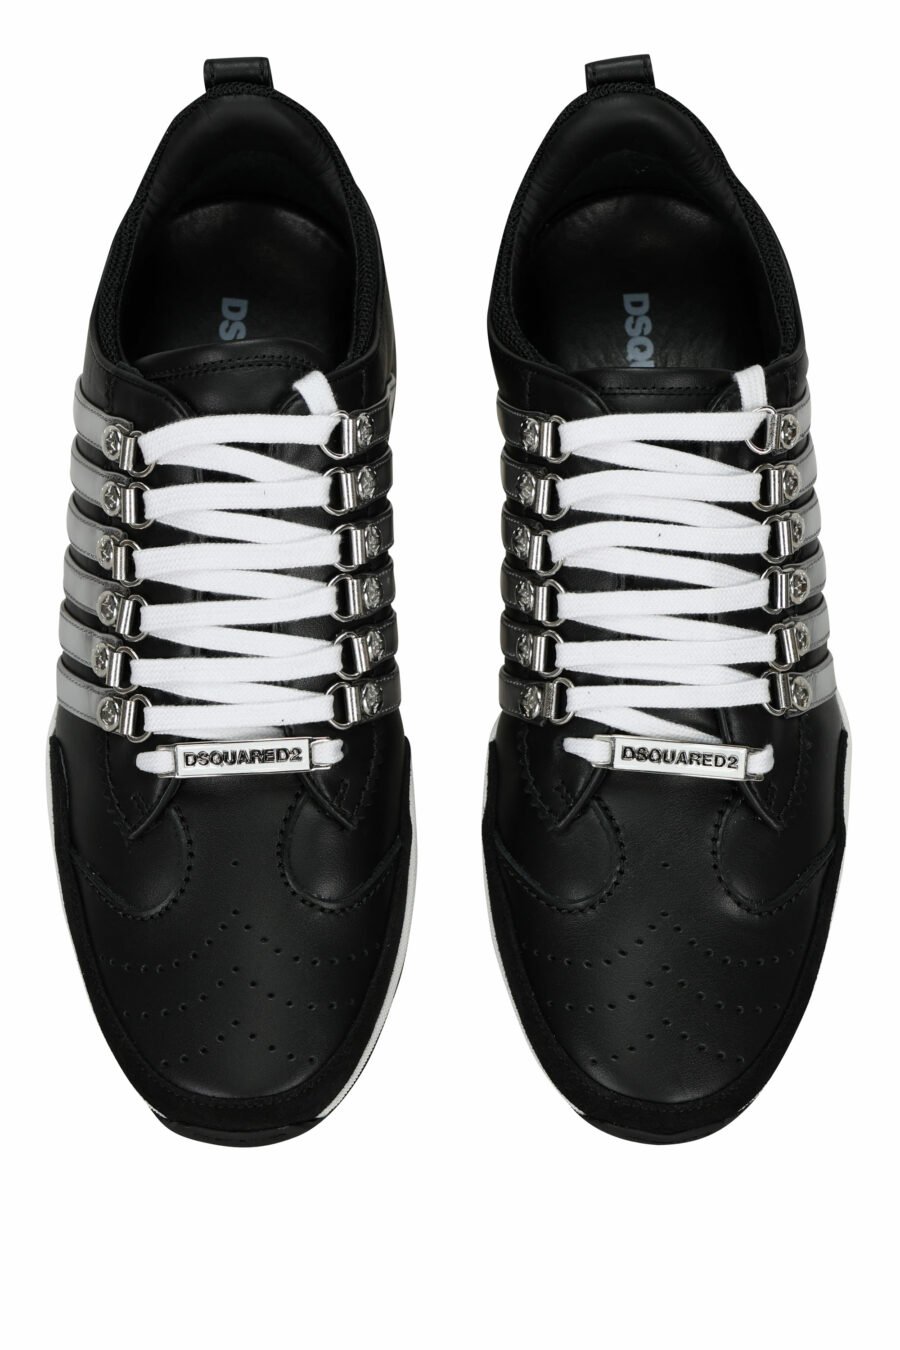 Black trainers with silver lines and bicolour sole - 8055777301289 4